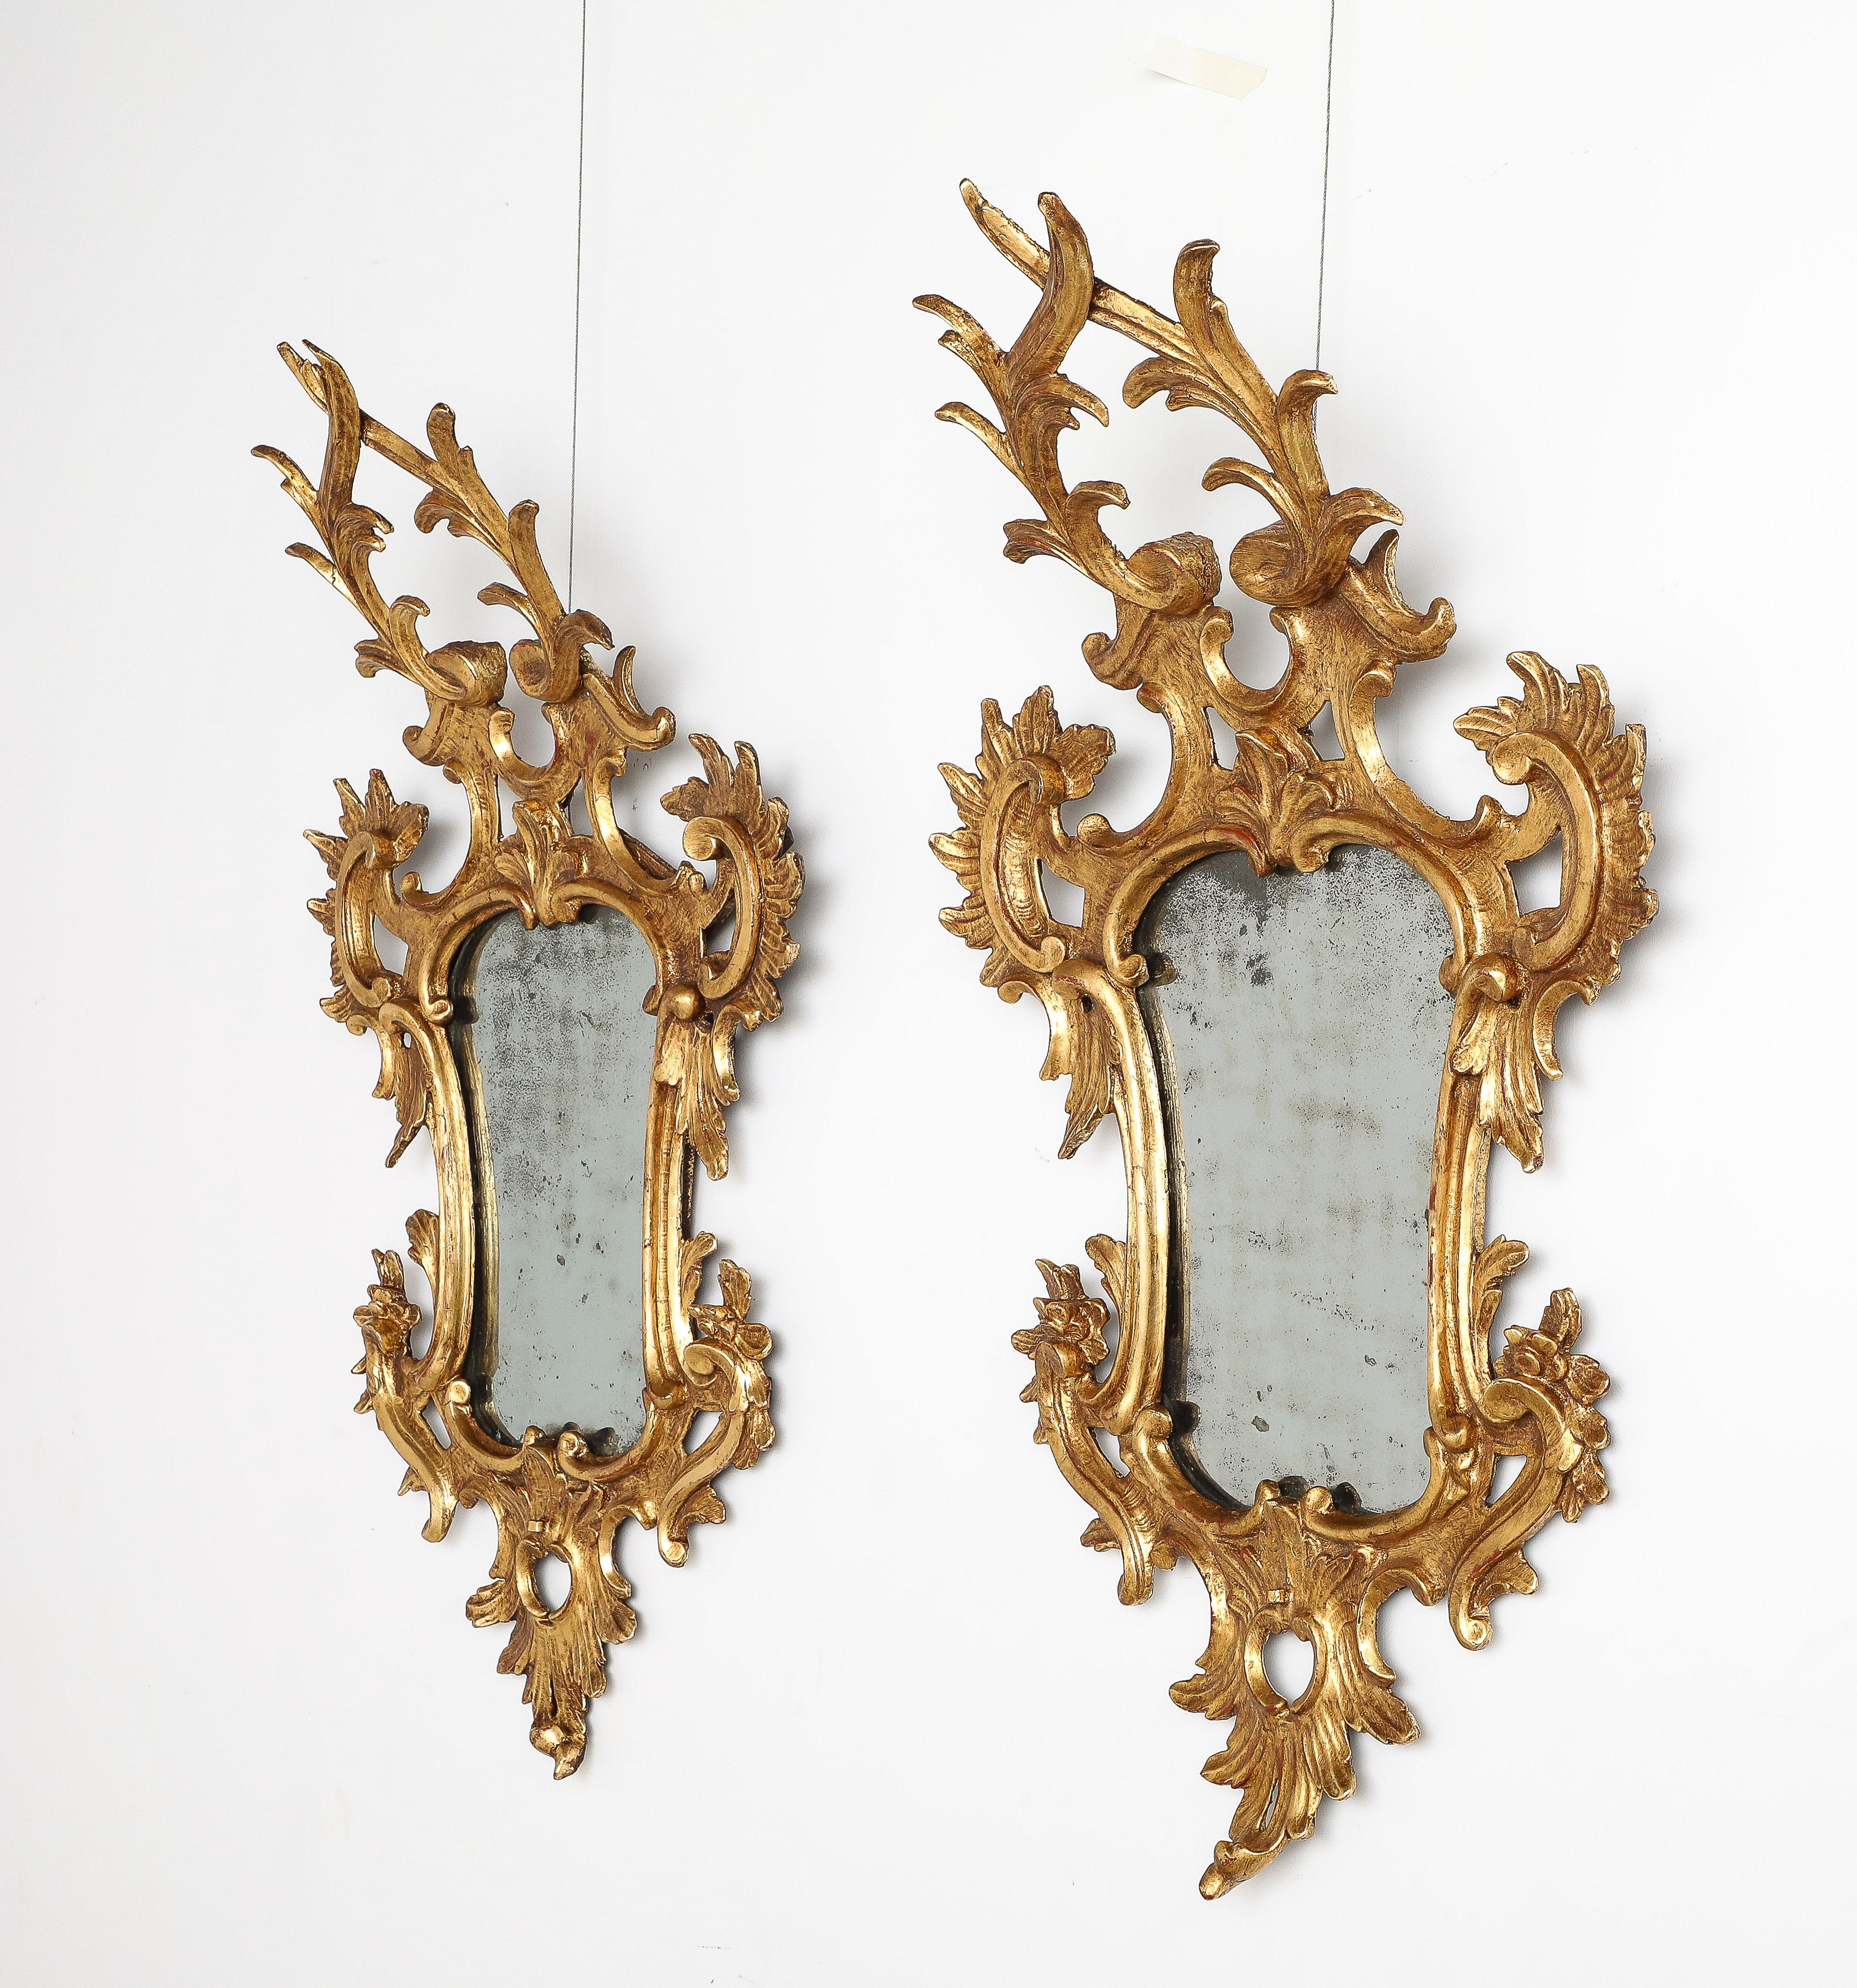 A pair of very fine Northern Italian Rococo carved and gilded wood mirrors.  Of grand scale and elaborately carved in symmetrical form with flowers, scrollwork and rocailles. A metal mount for the candle branches is still attached at the bottom of